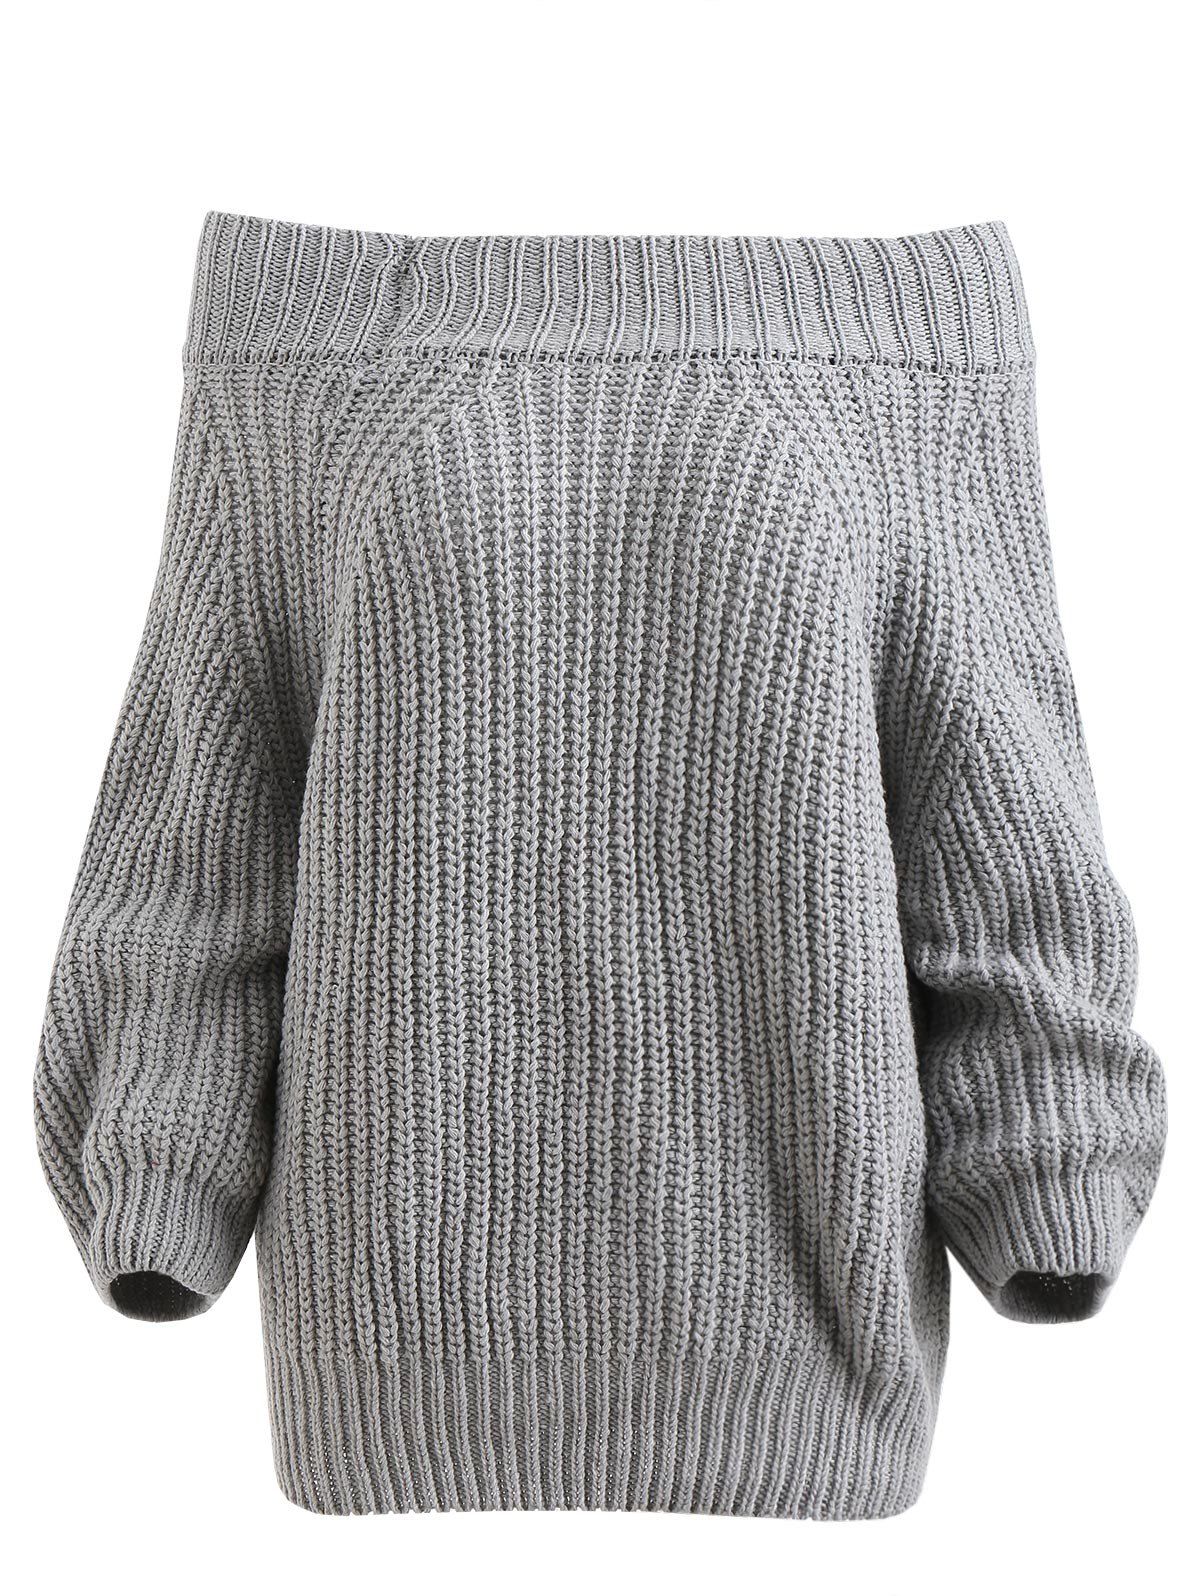 https://www.rosegal.com/sweaters-cardigans/pullover-off-the-shoulder-chunky-sweater-2341140.html?lkid=16127505